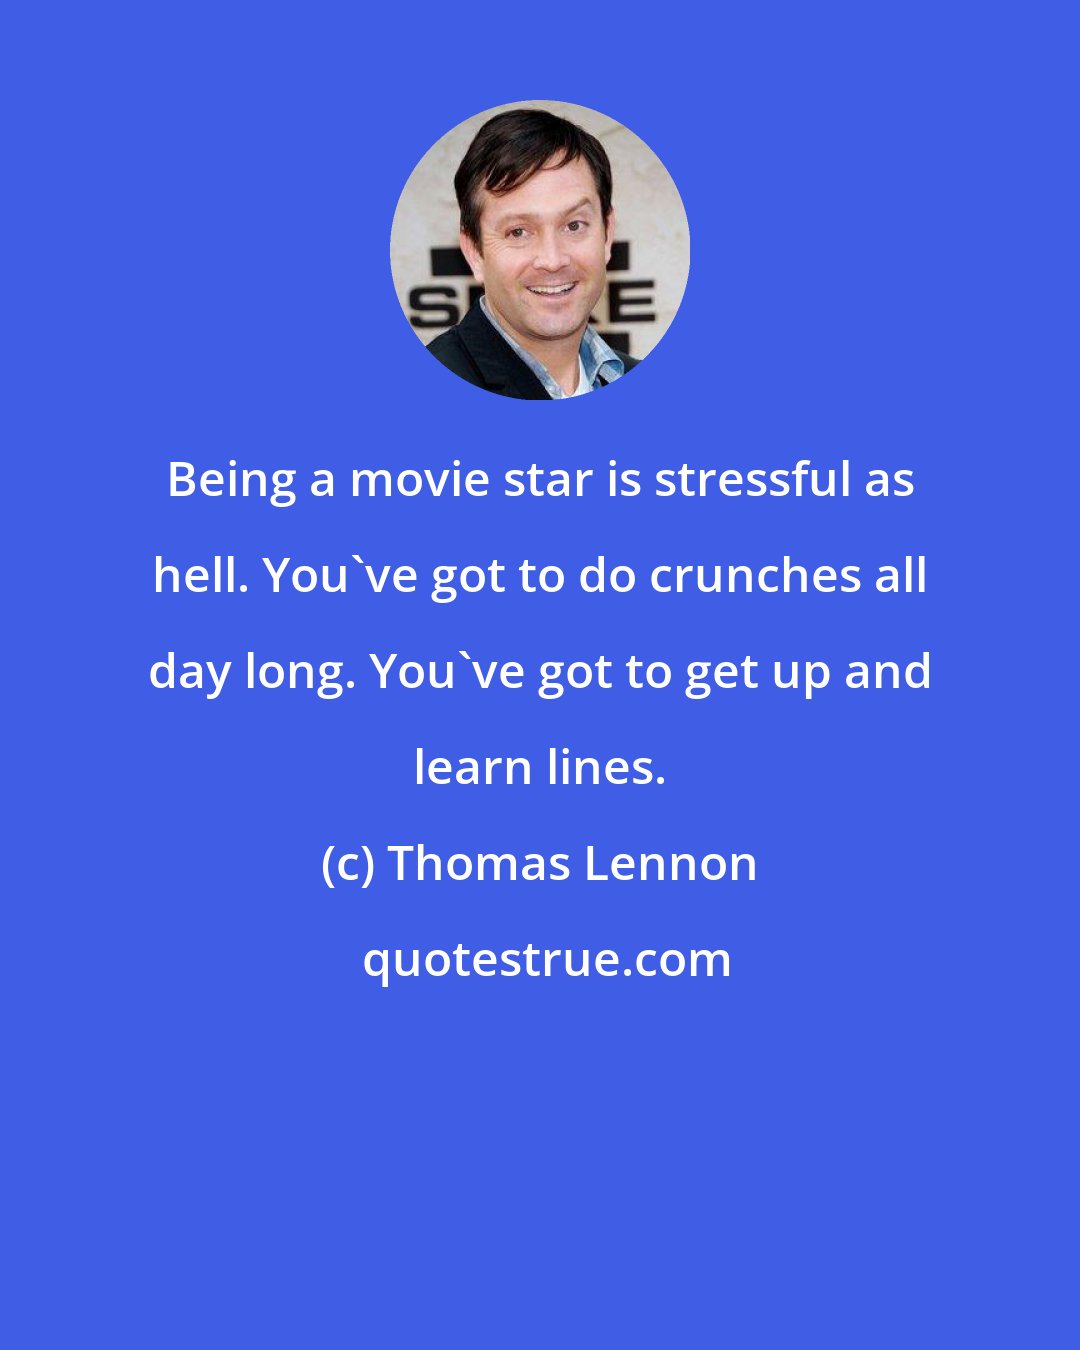 Thomas Lennon: Being a movie star is stressful as hell. You've got to do crunches all day long. You've got to get up and learn lines.